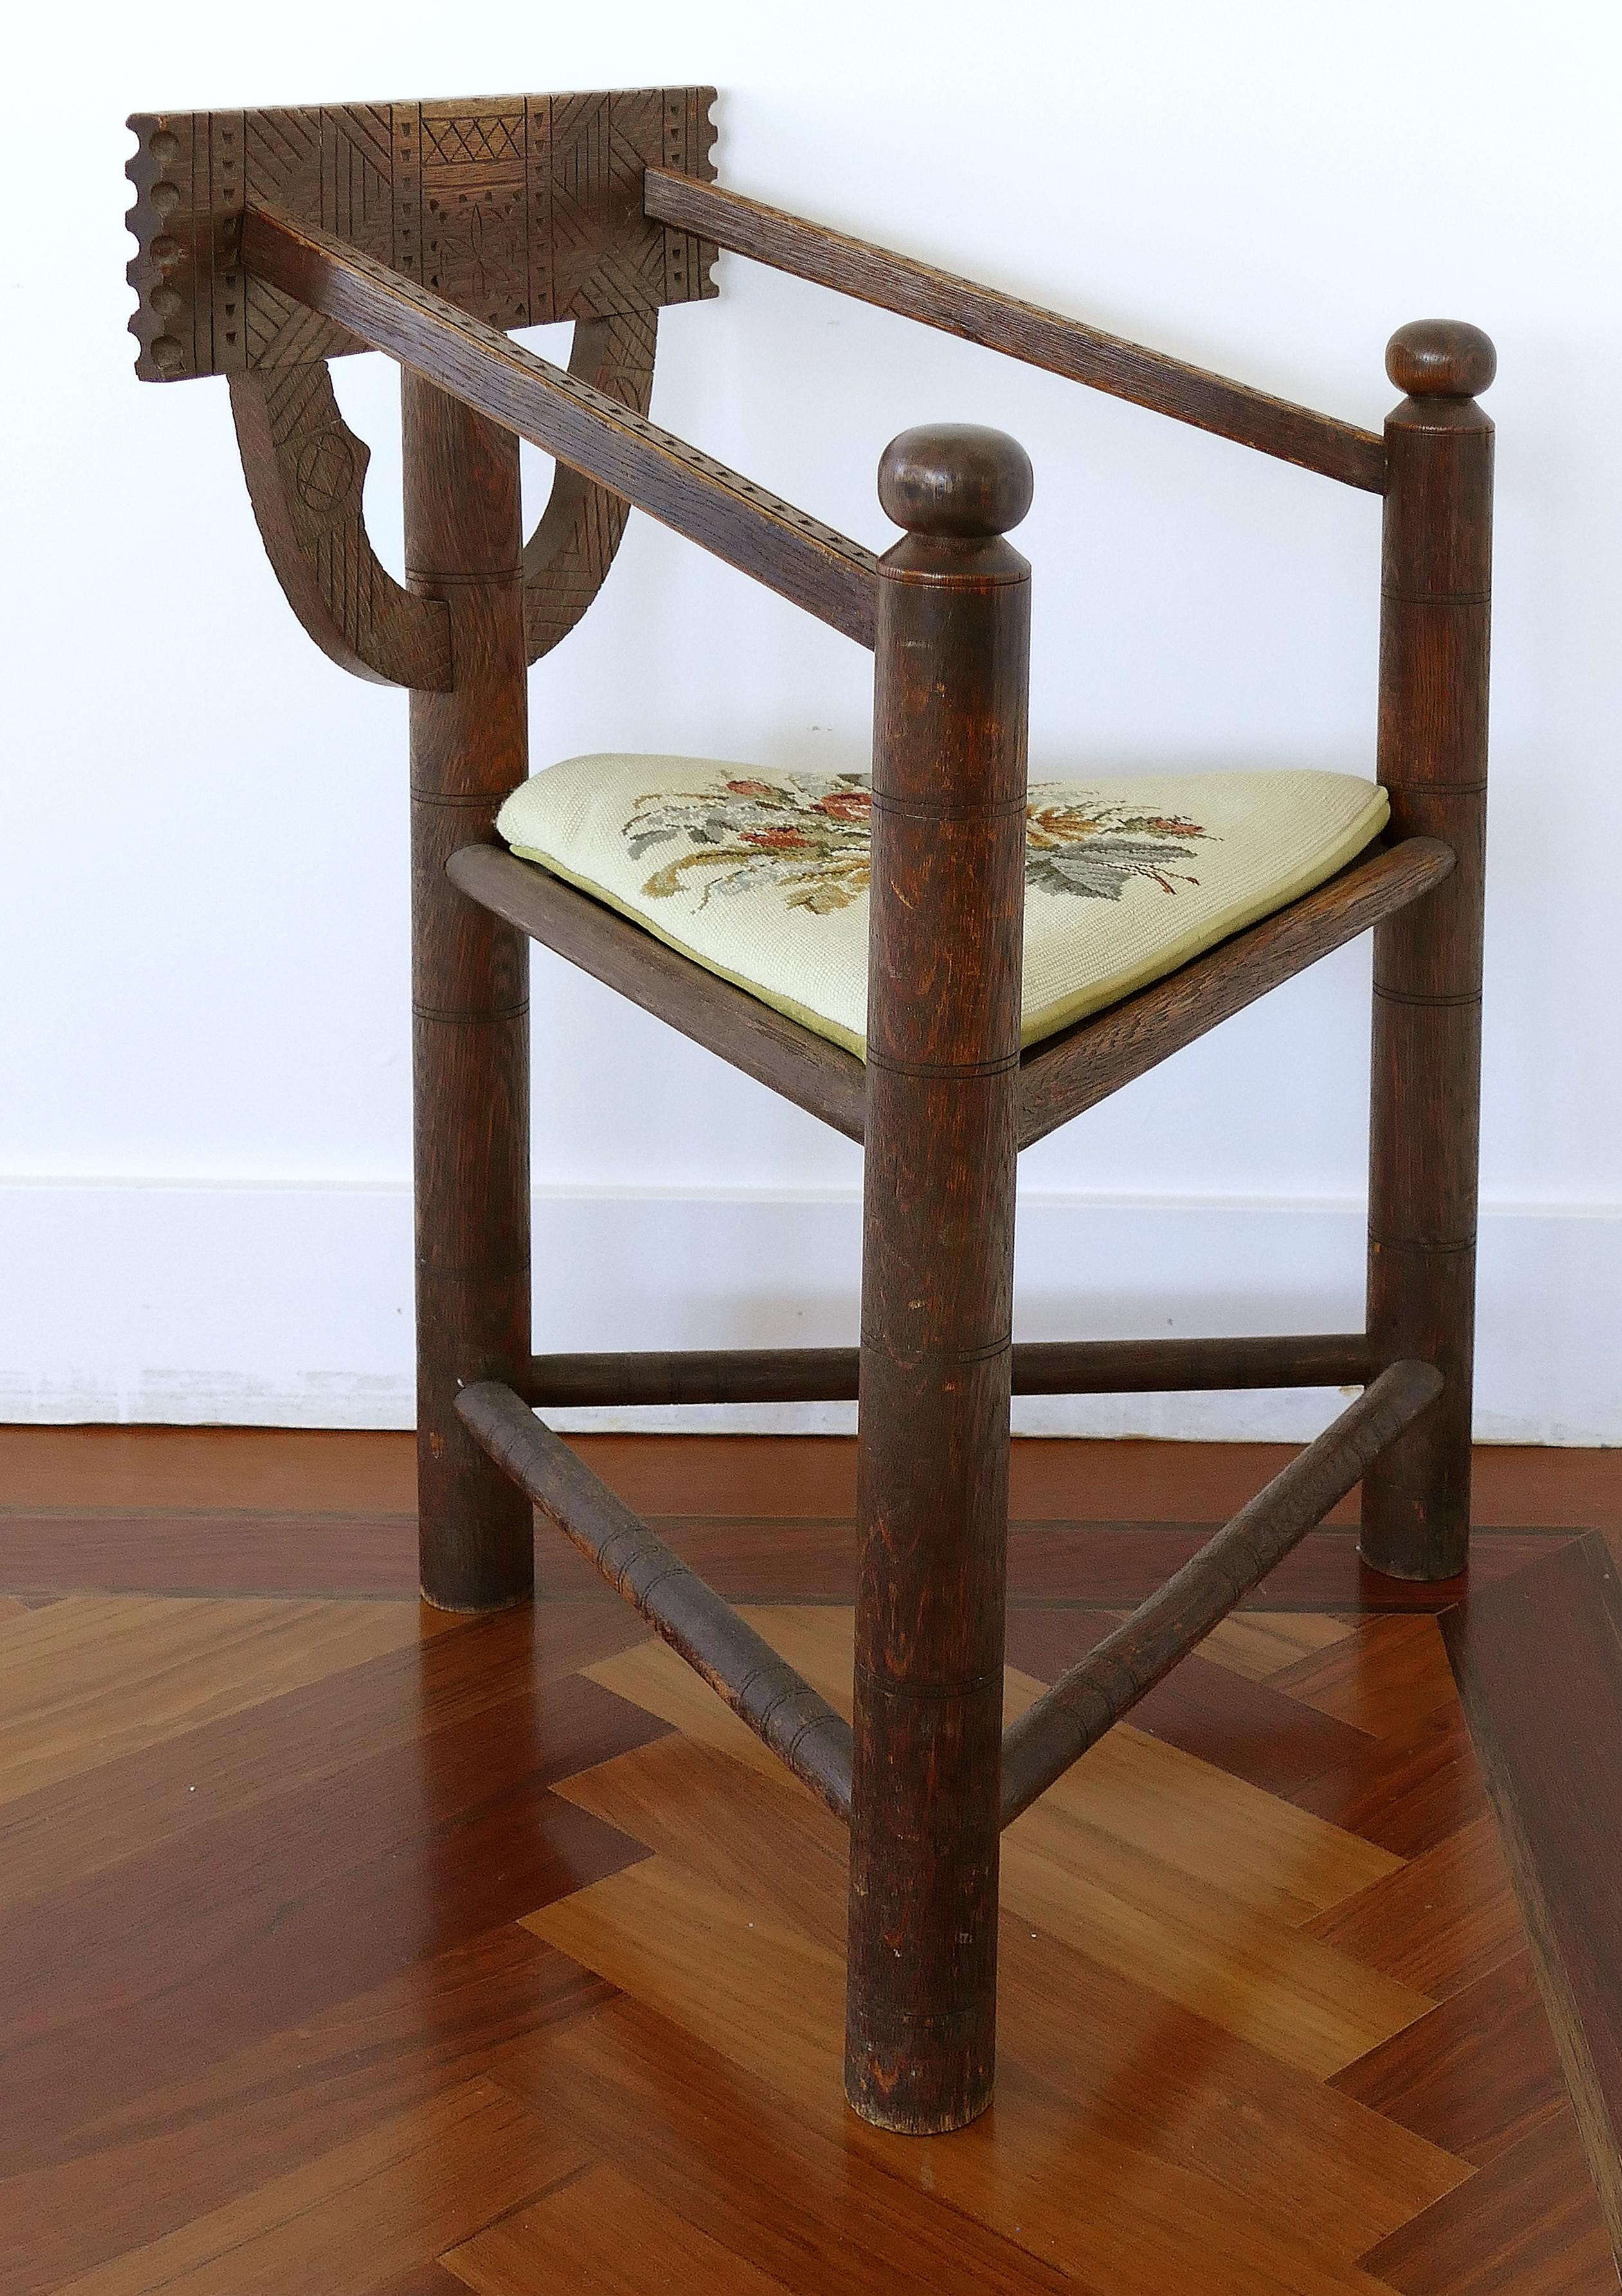 19th-Century Swedish Monk's Corner Chair with Needlepoint Cushion

Offered for sale is a late 19th-century carved wood corner chair that is known as a Swedish Monks' chair. The seat has been fitted with a loose needlepoint cushion.

Measures: Arm